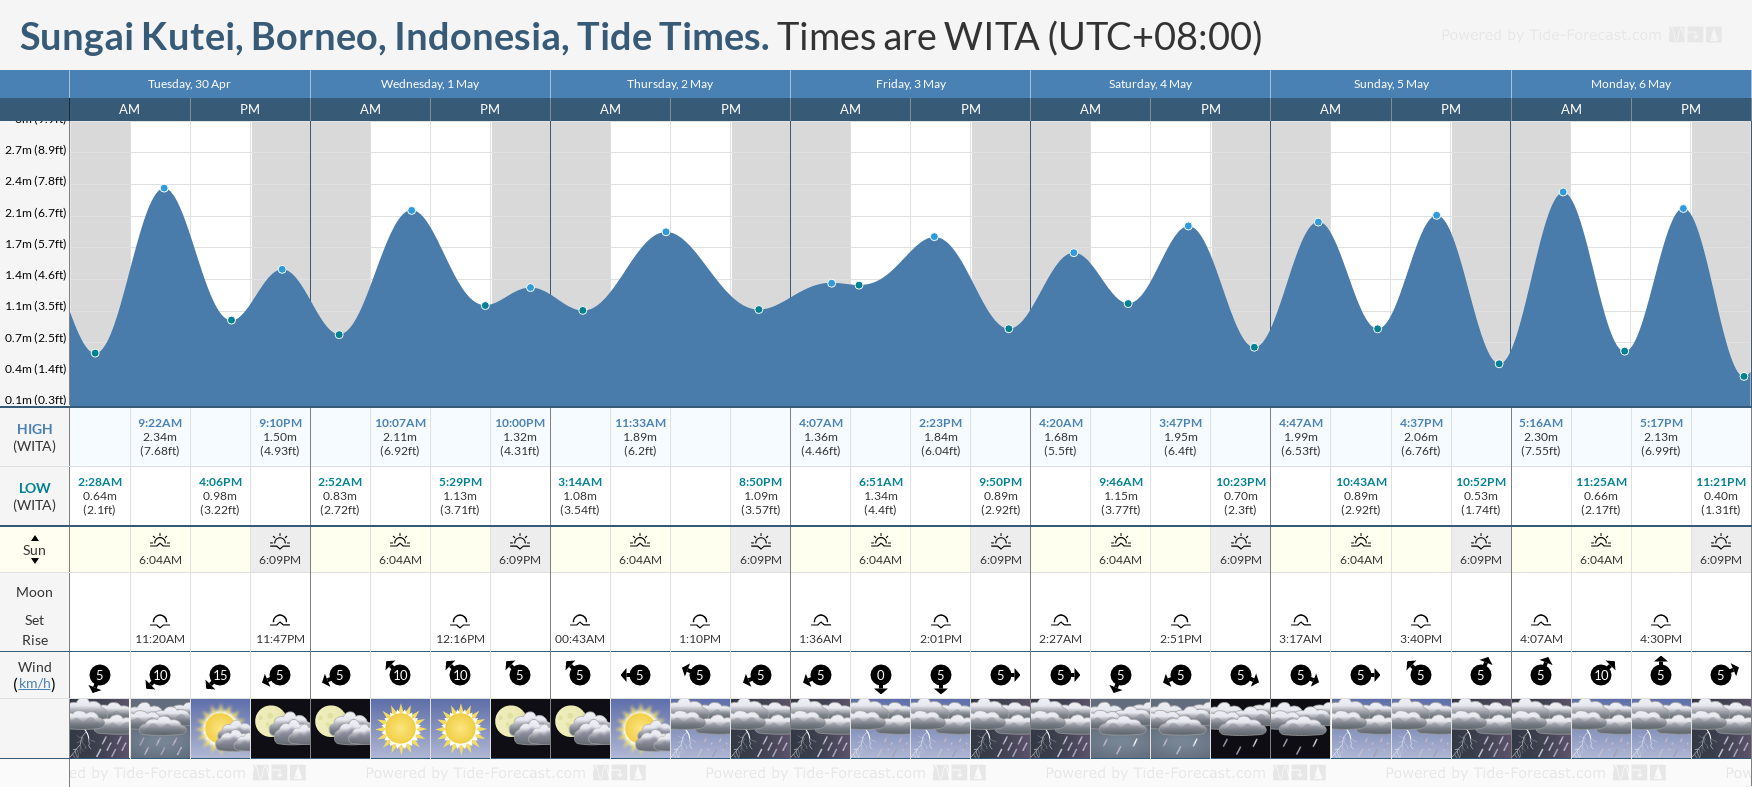 Sungai Kutei, Borneo, Indonesia Tide Chart including high and low tide tide times for the next 7 days